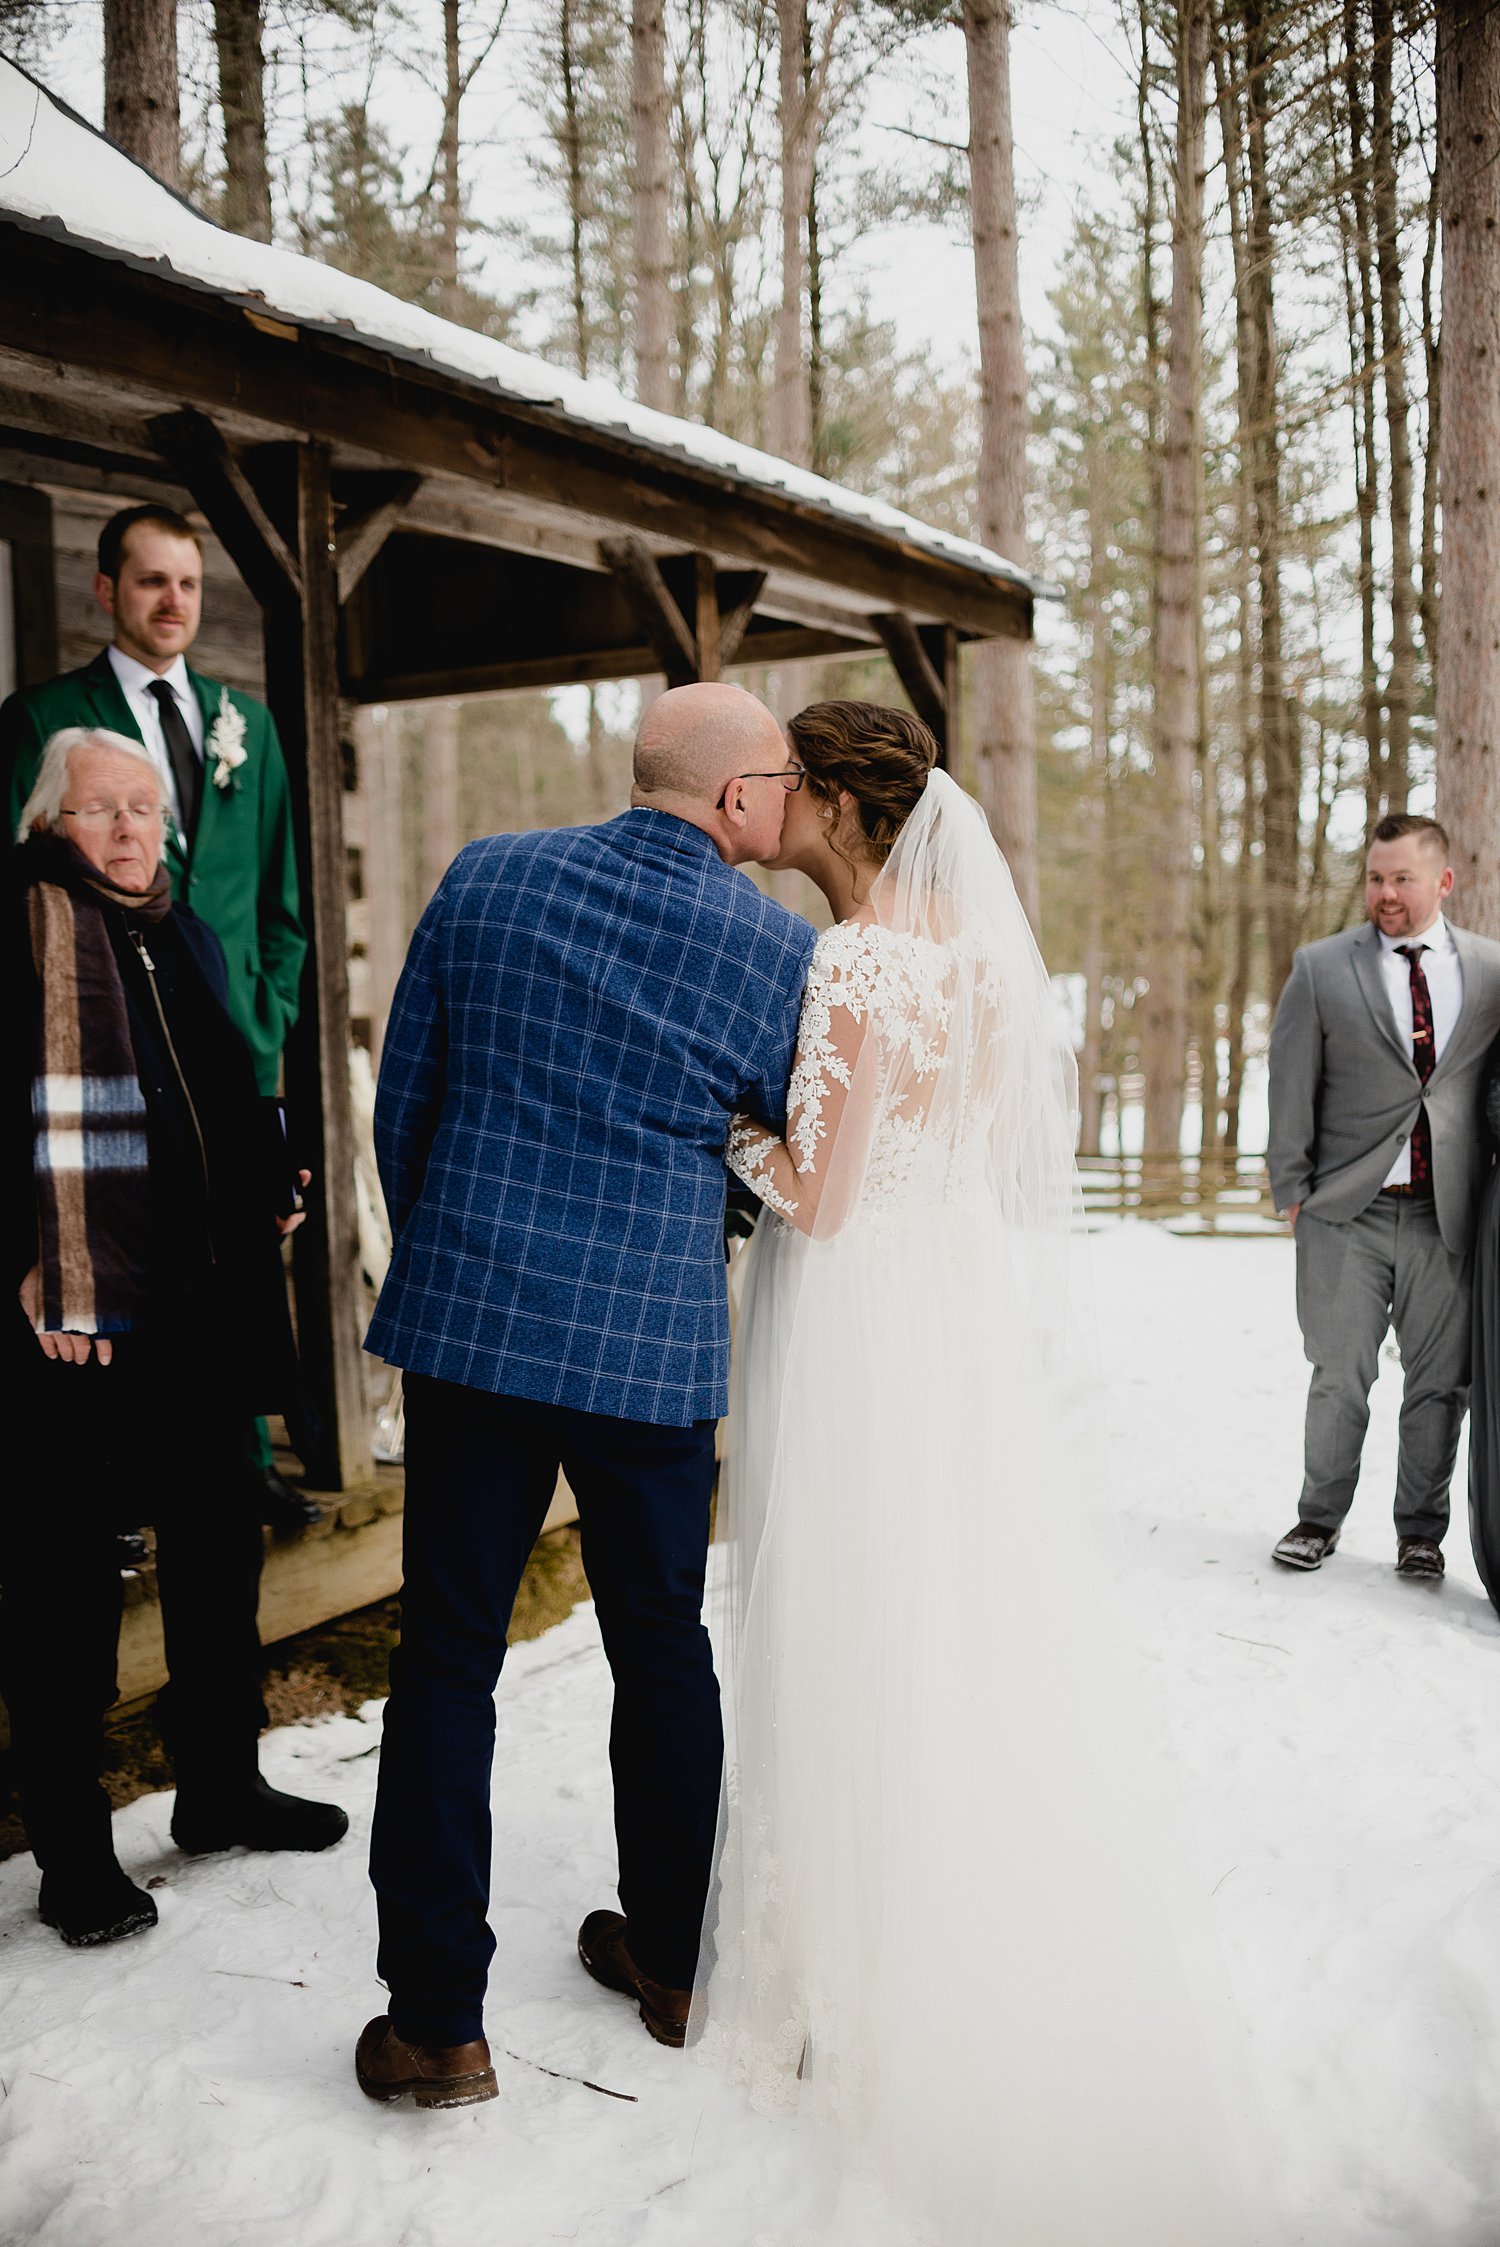 Intimate Winter Elopement at O'Hara Mill Homestead in Madoc, Ontario | Prince Edward County Wedding Photographer | Holly McMurter Photographs_0010.jpg